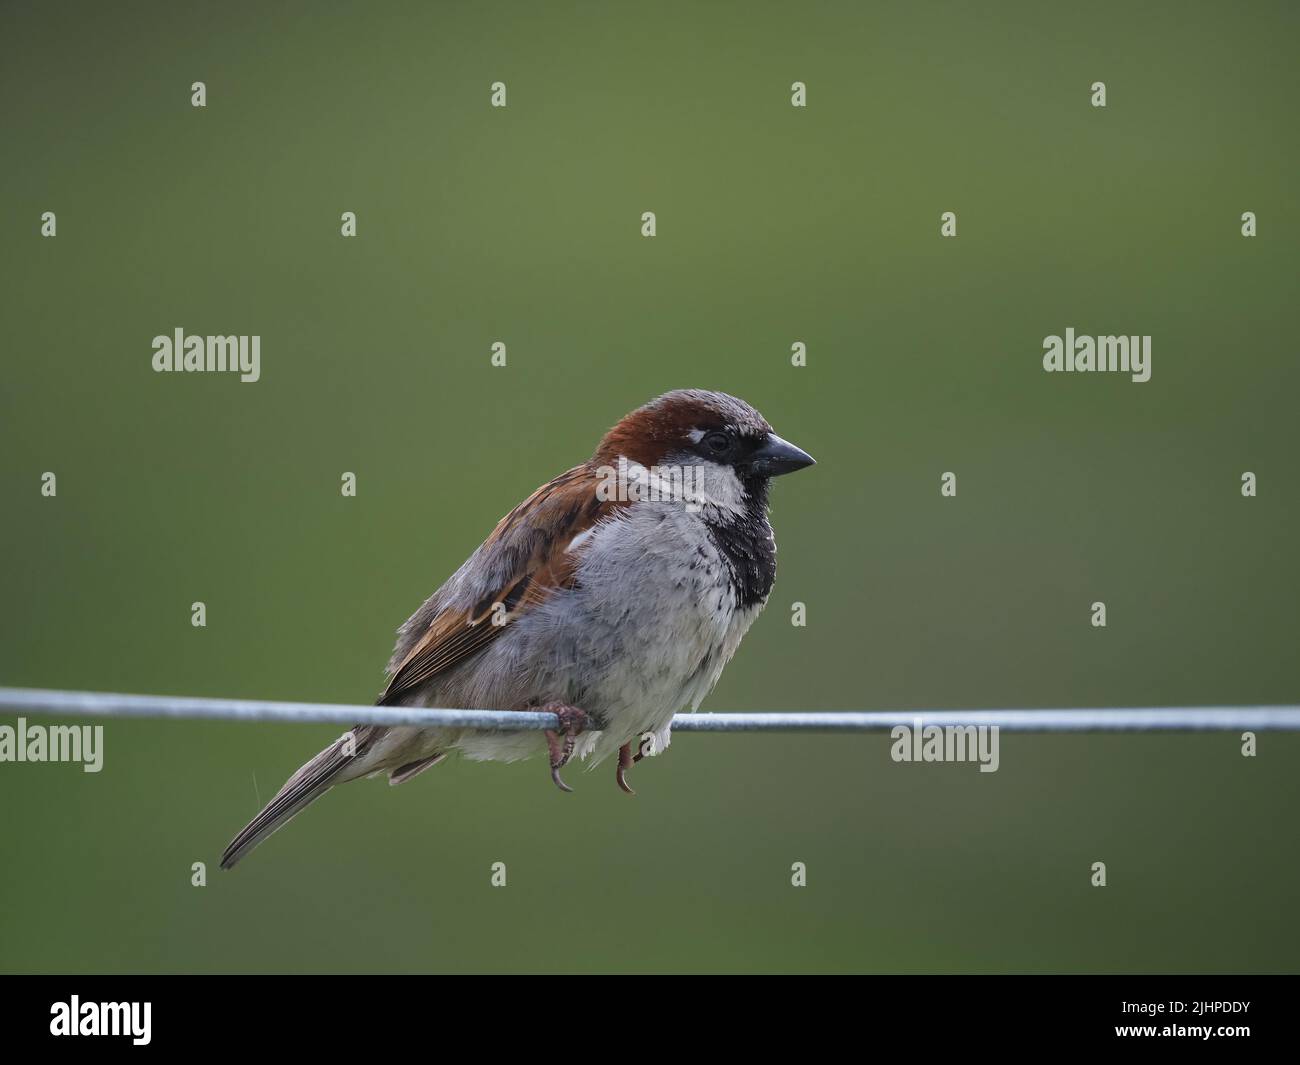 House sparrows are declining in many areas, but are often found in family or communal parties. Stock Photo